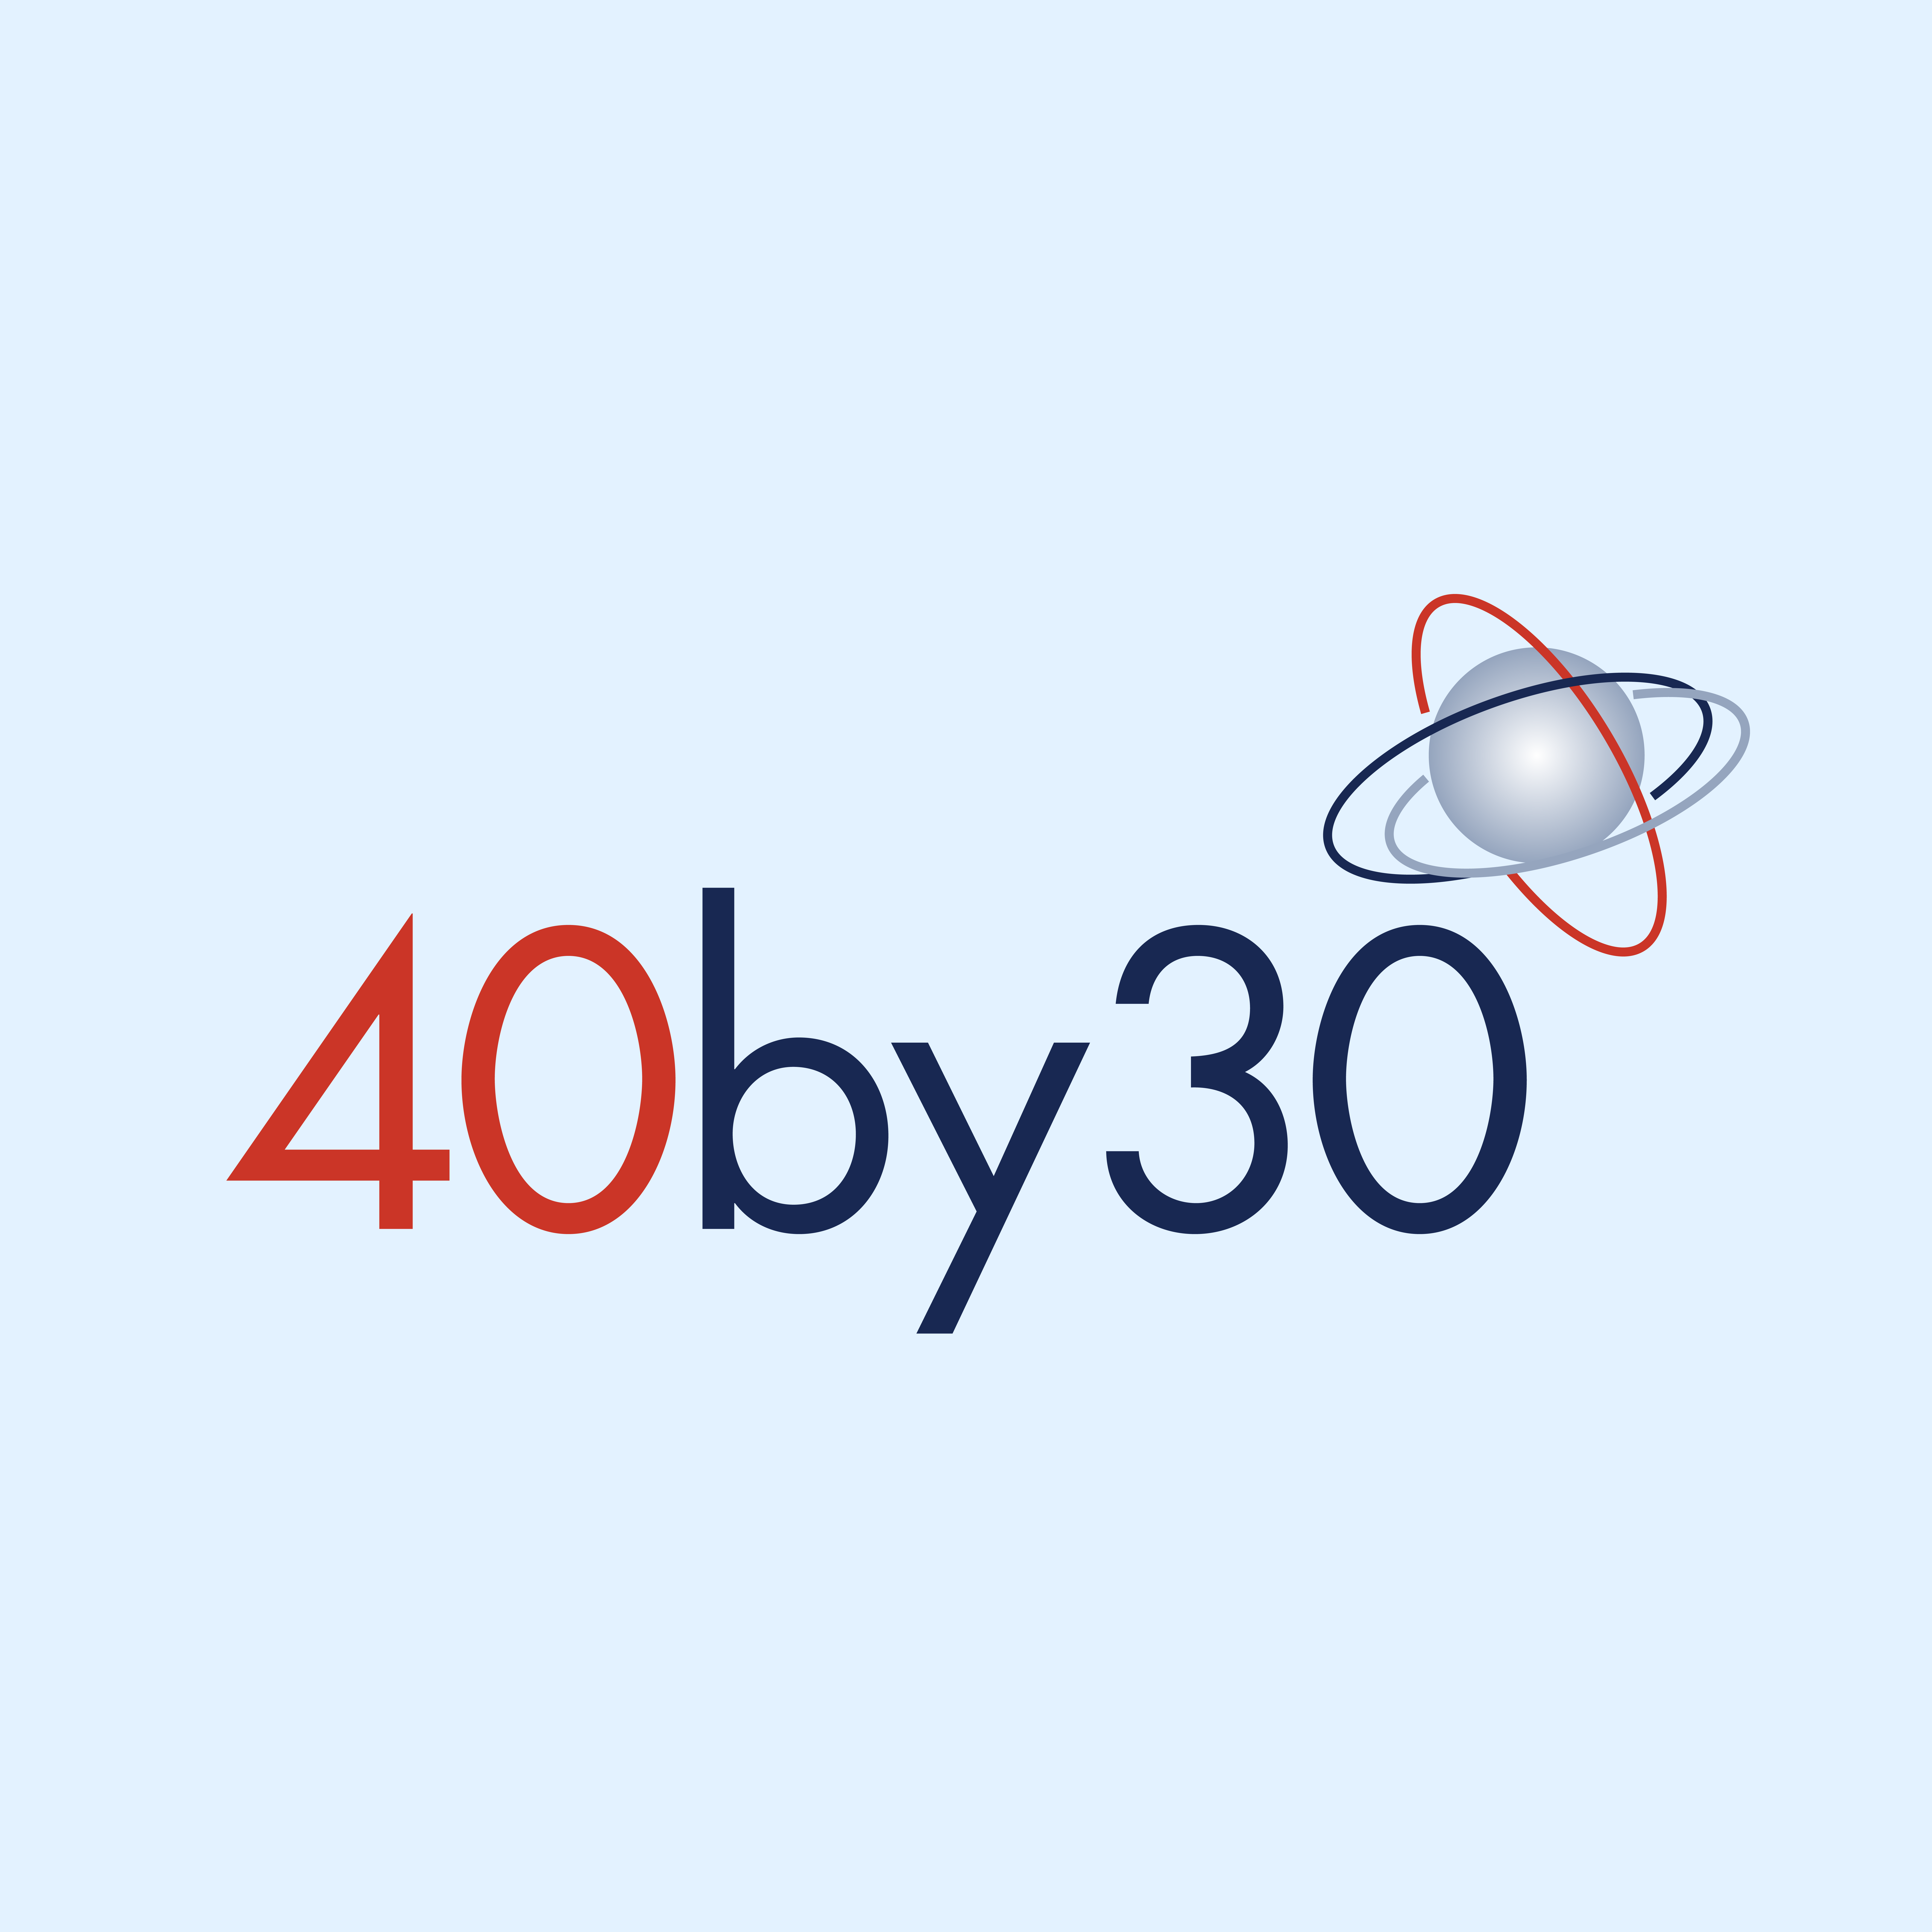 Wista Norway’s “40 by 30” campaign - Logo